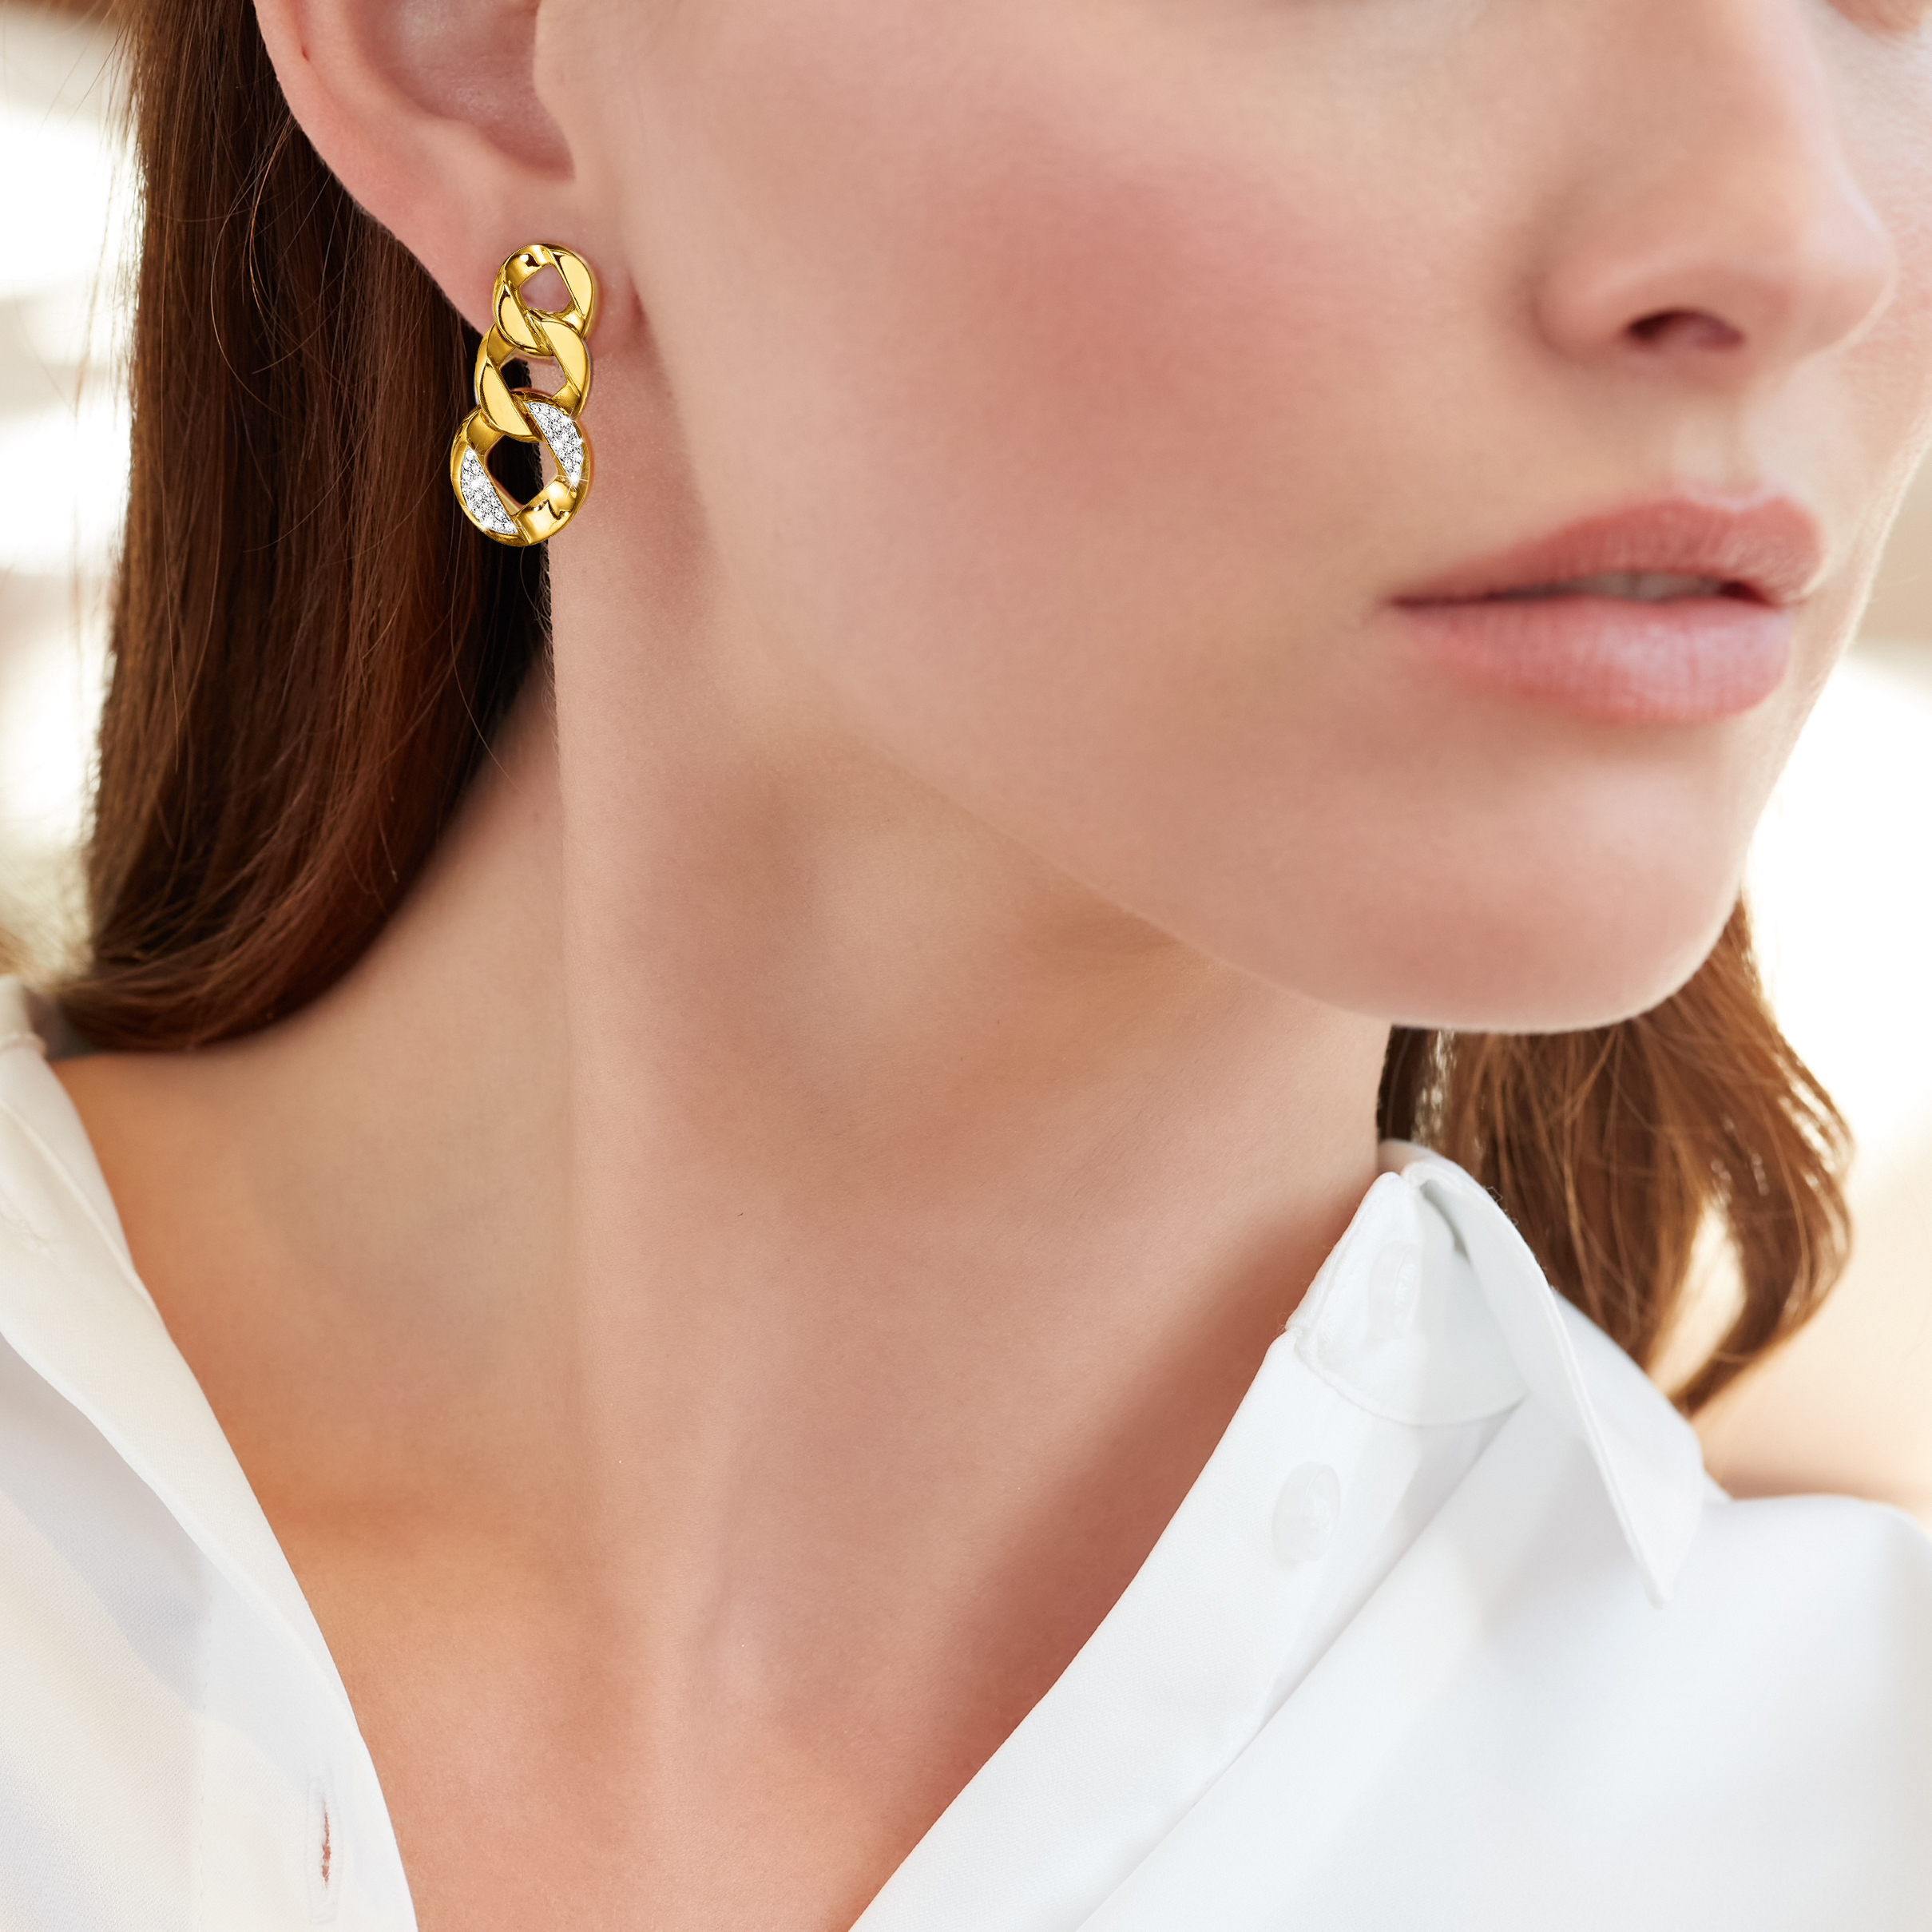 curb-link piccolo Earclips with diamonds on model